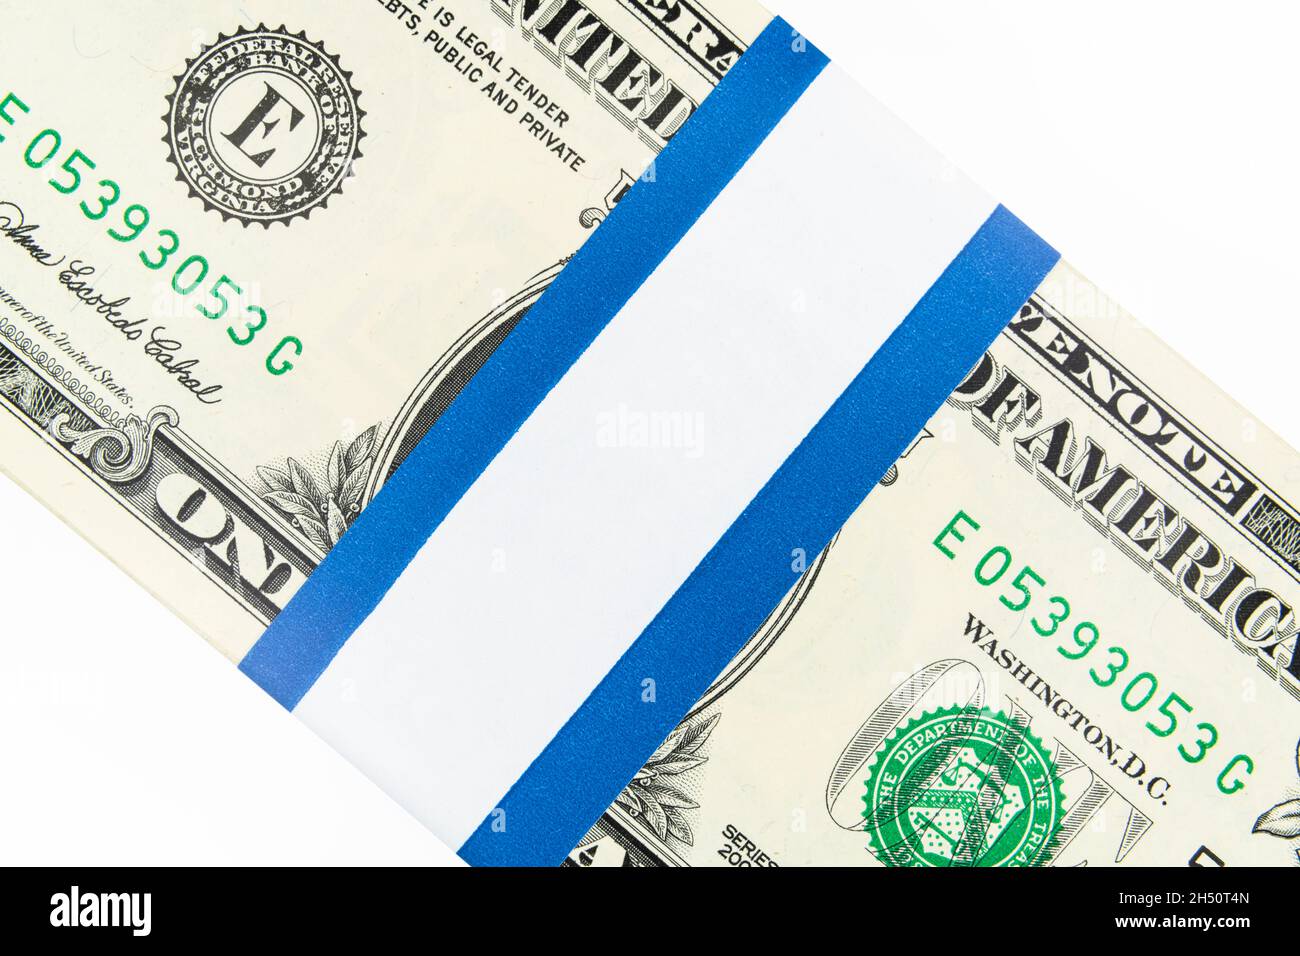 US Dollar bill money bundle with blank currency strap. Stock Photo